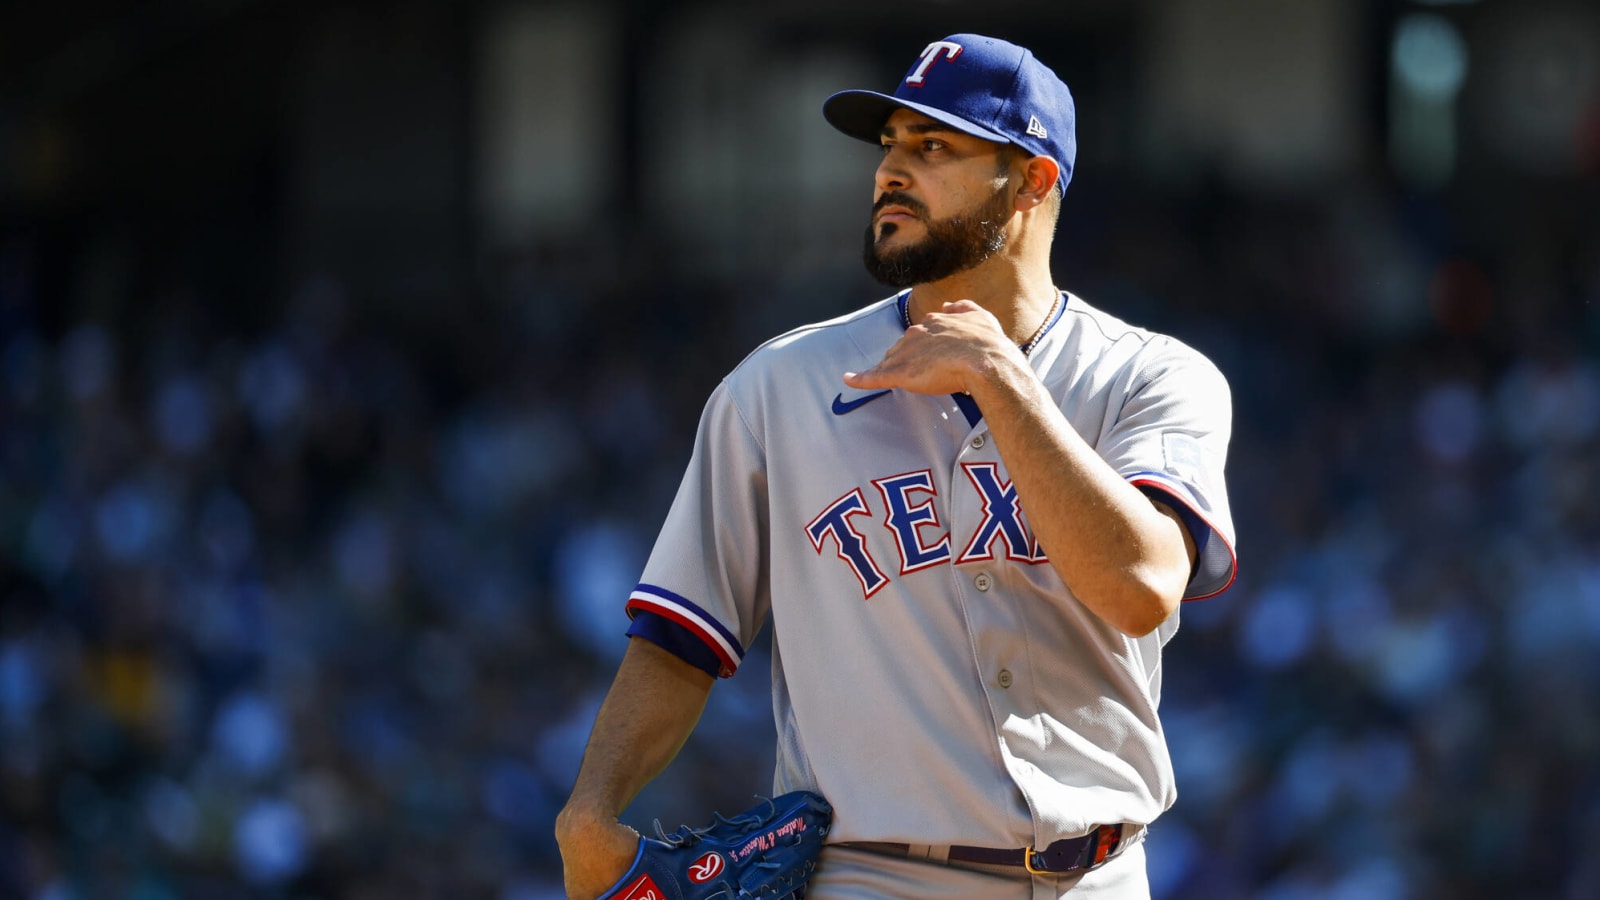  Martin Perez Goes From Follower to New-School Leader